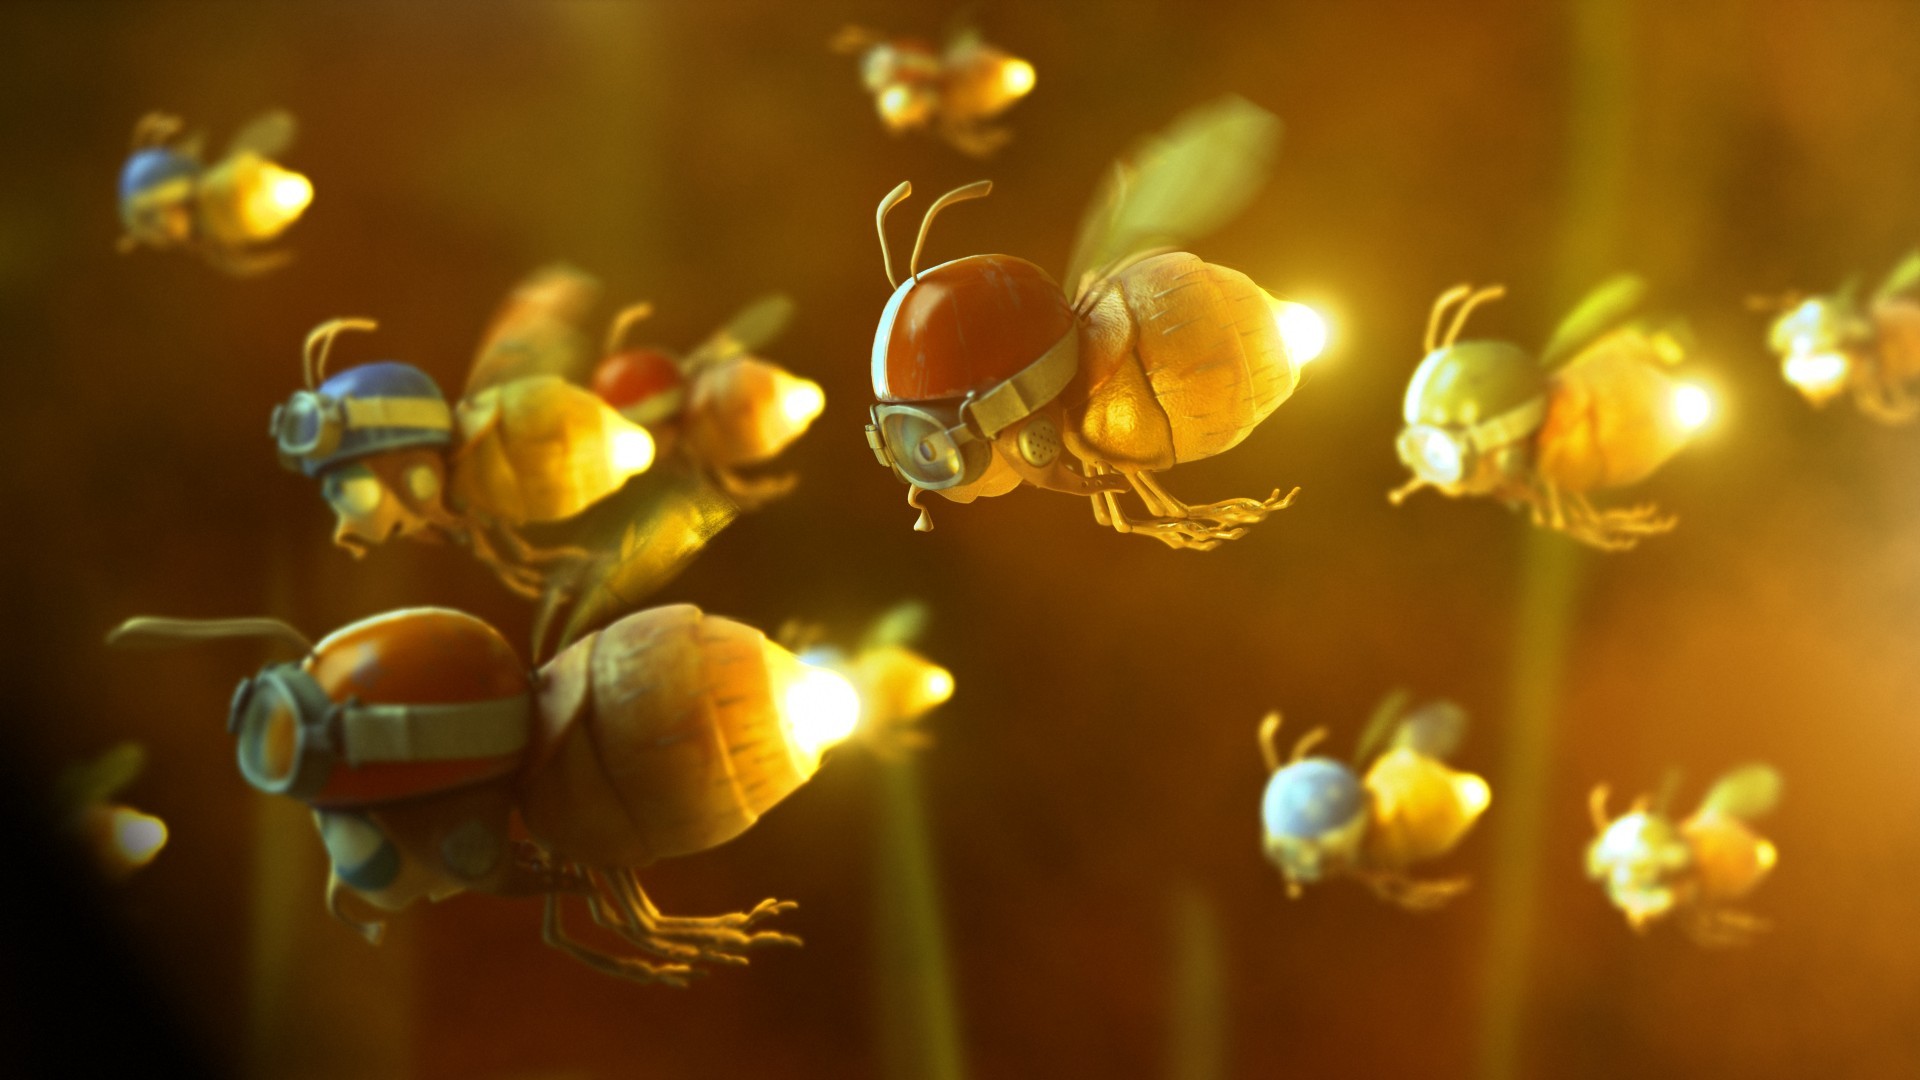 1920x1080 Humor insect firefly googles mask wings cute flight fly wallpaper |   | 32148 | WallpaperUP